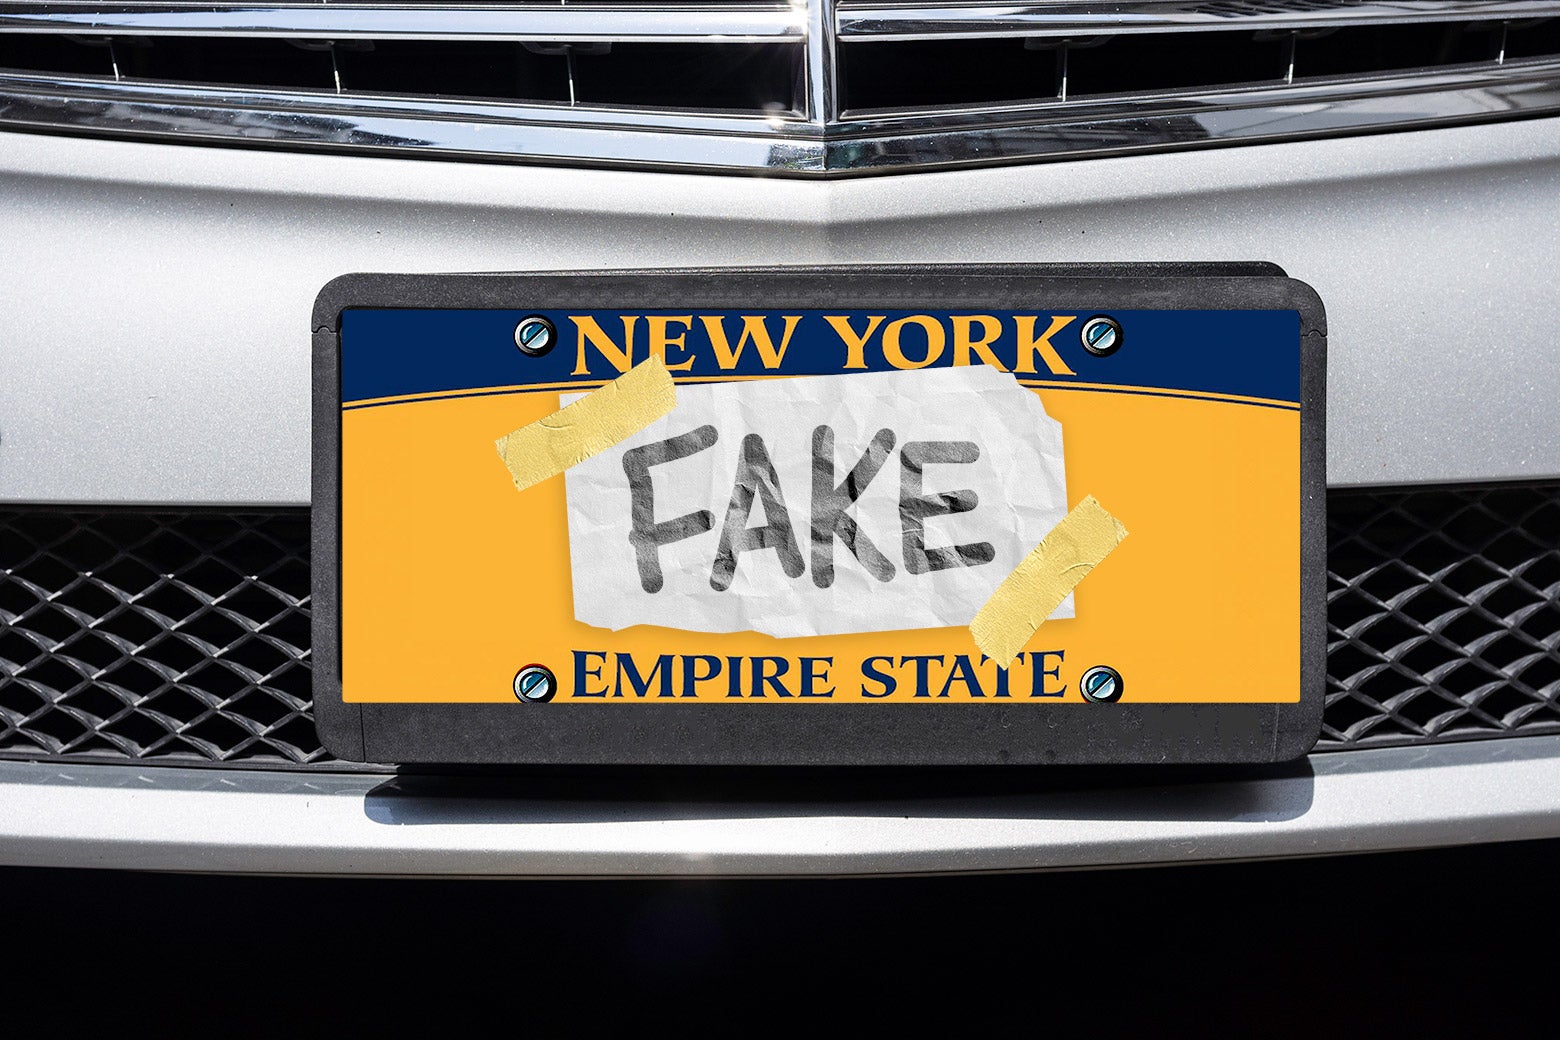 A car license plate with a piece of paper that says "FAKE" taped over it.